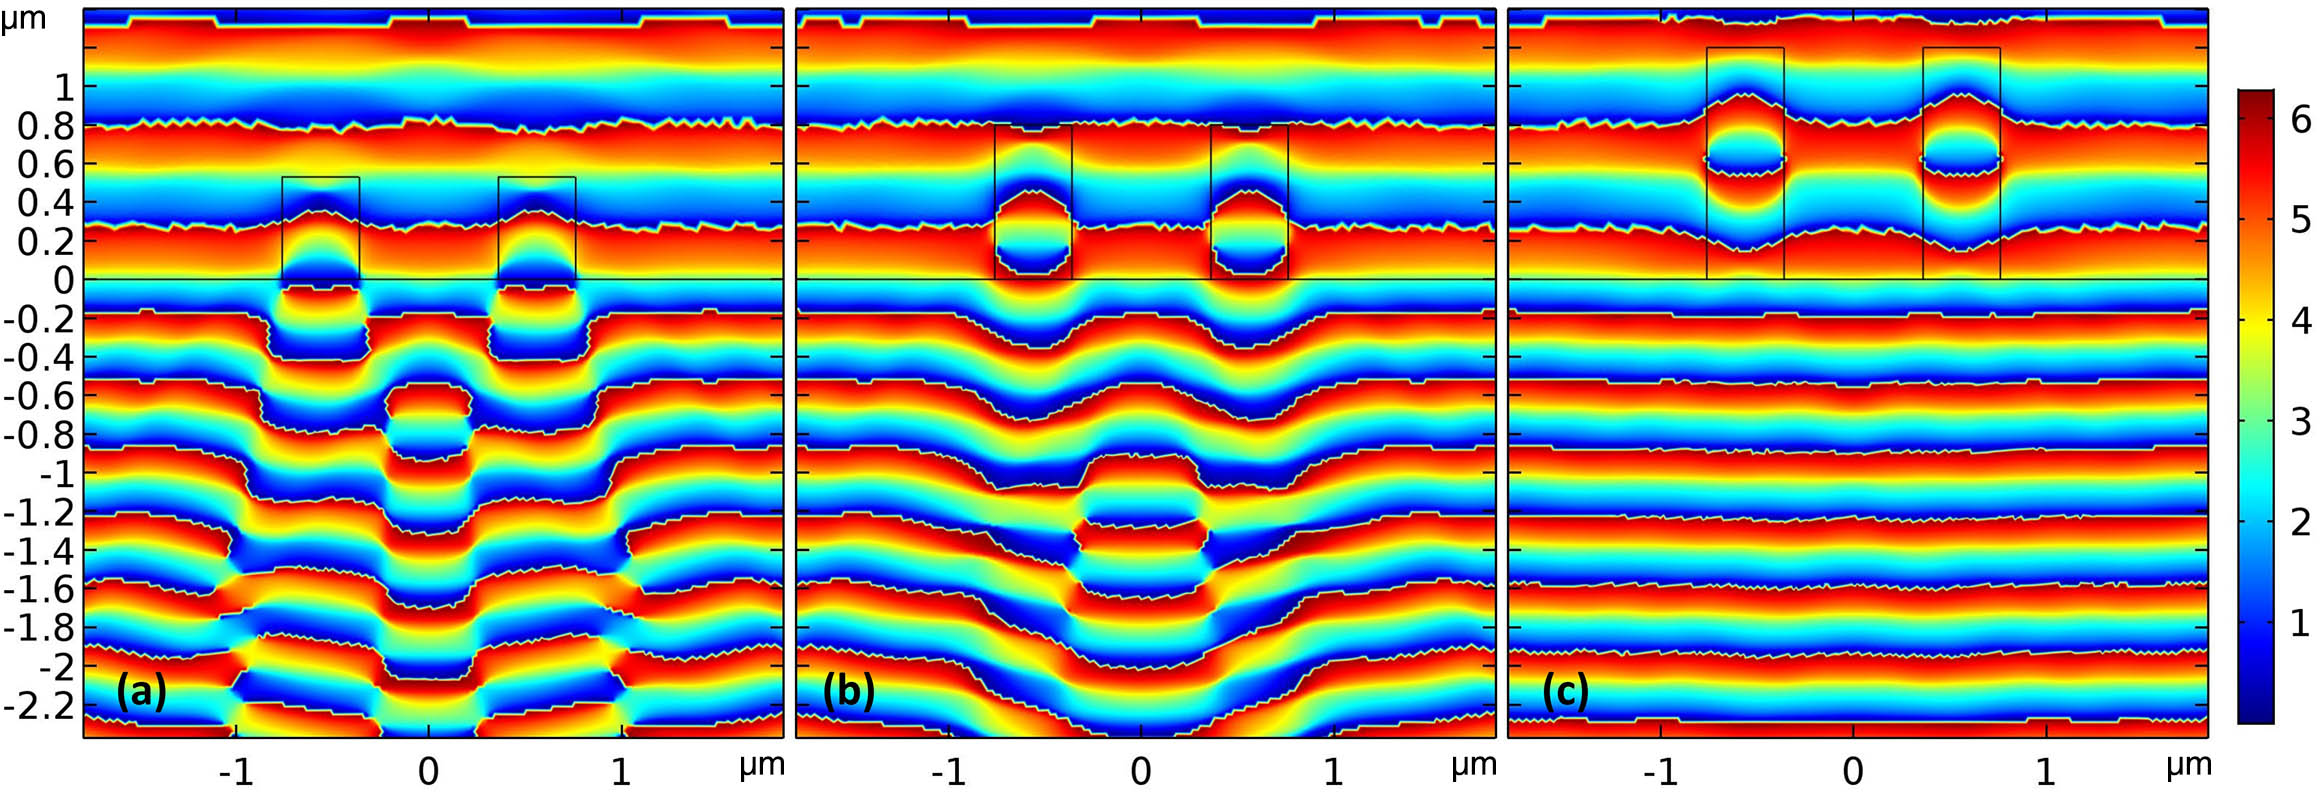 Phase distribution obtained for pairs of dielectric rectangles with different heights H=0.53, 0.80, 1.20 μm from left to right and width W=0.4 μm.